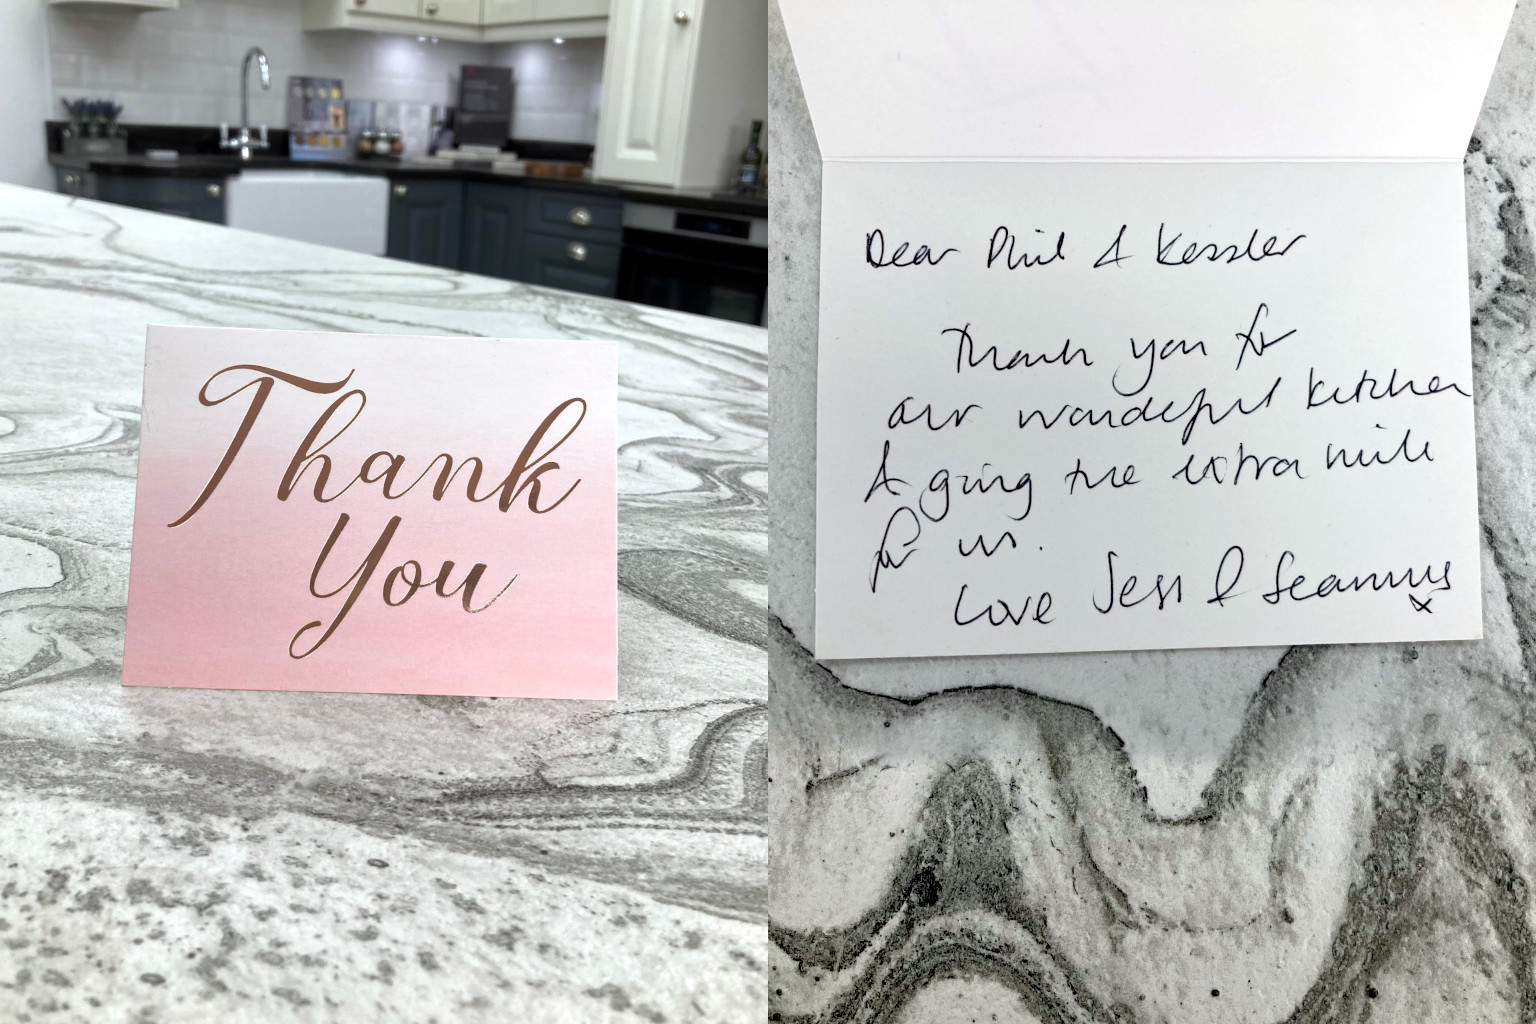 Photograph of a 'thank you' card.